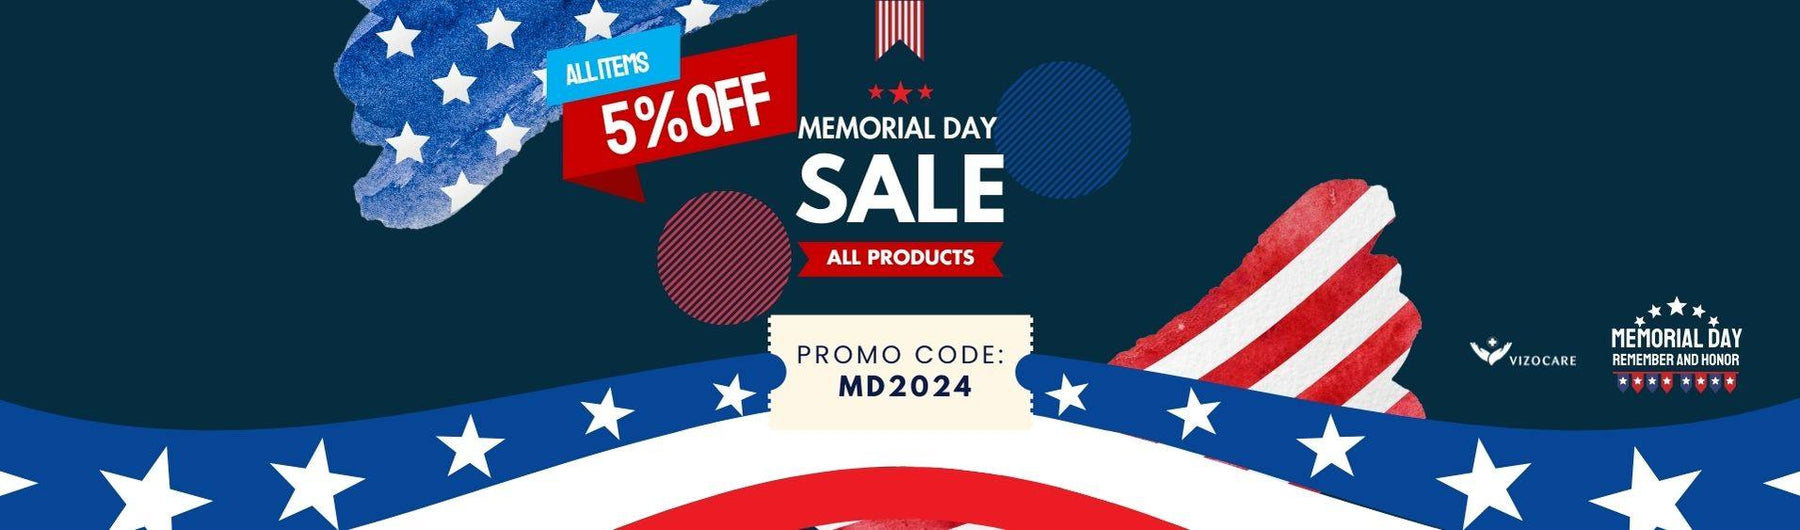 Gear Up for Summer Safety & Savings: Vizocare's Memorial Day Sale! - VizoCare